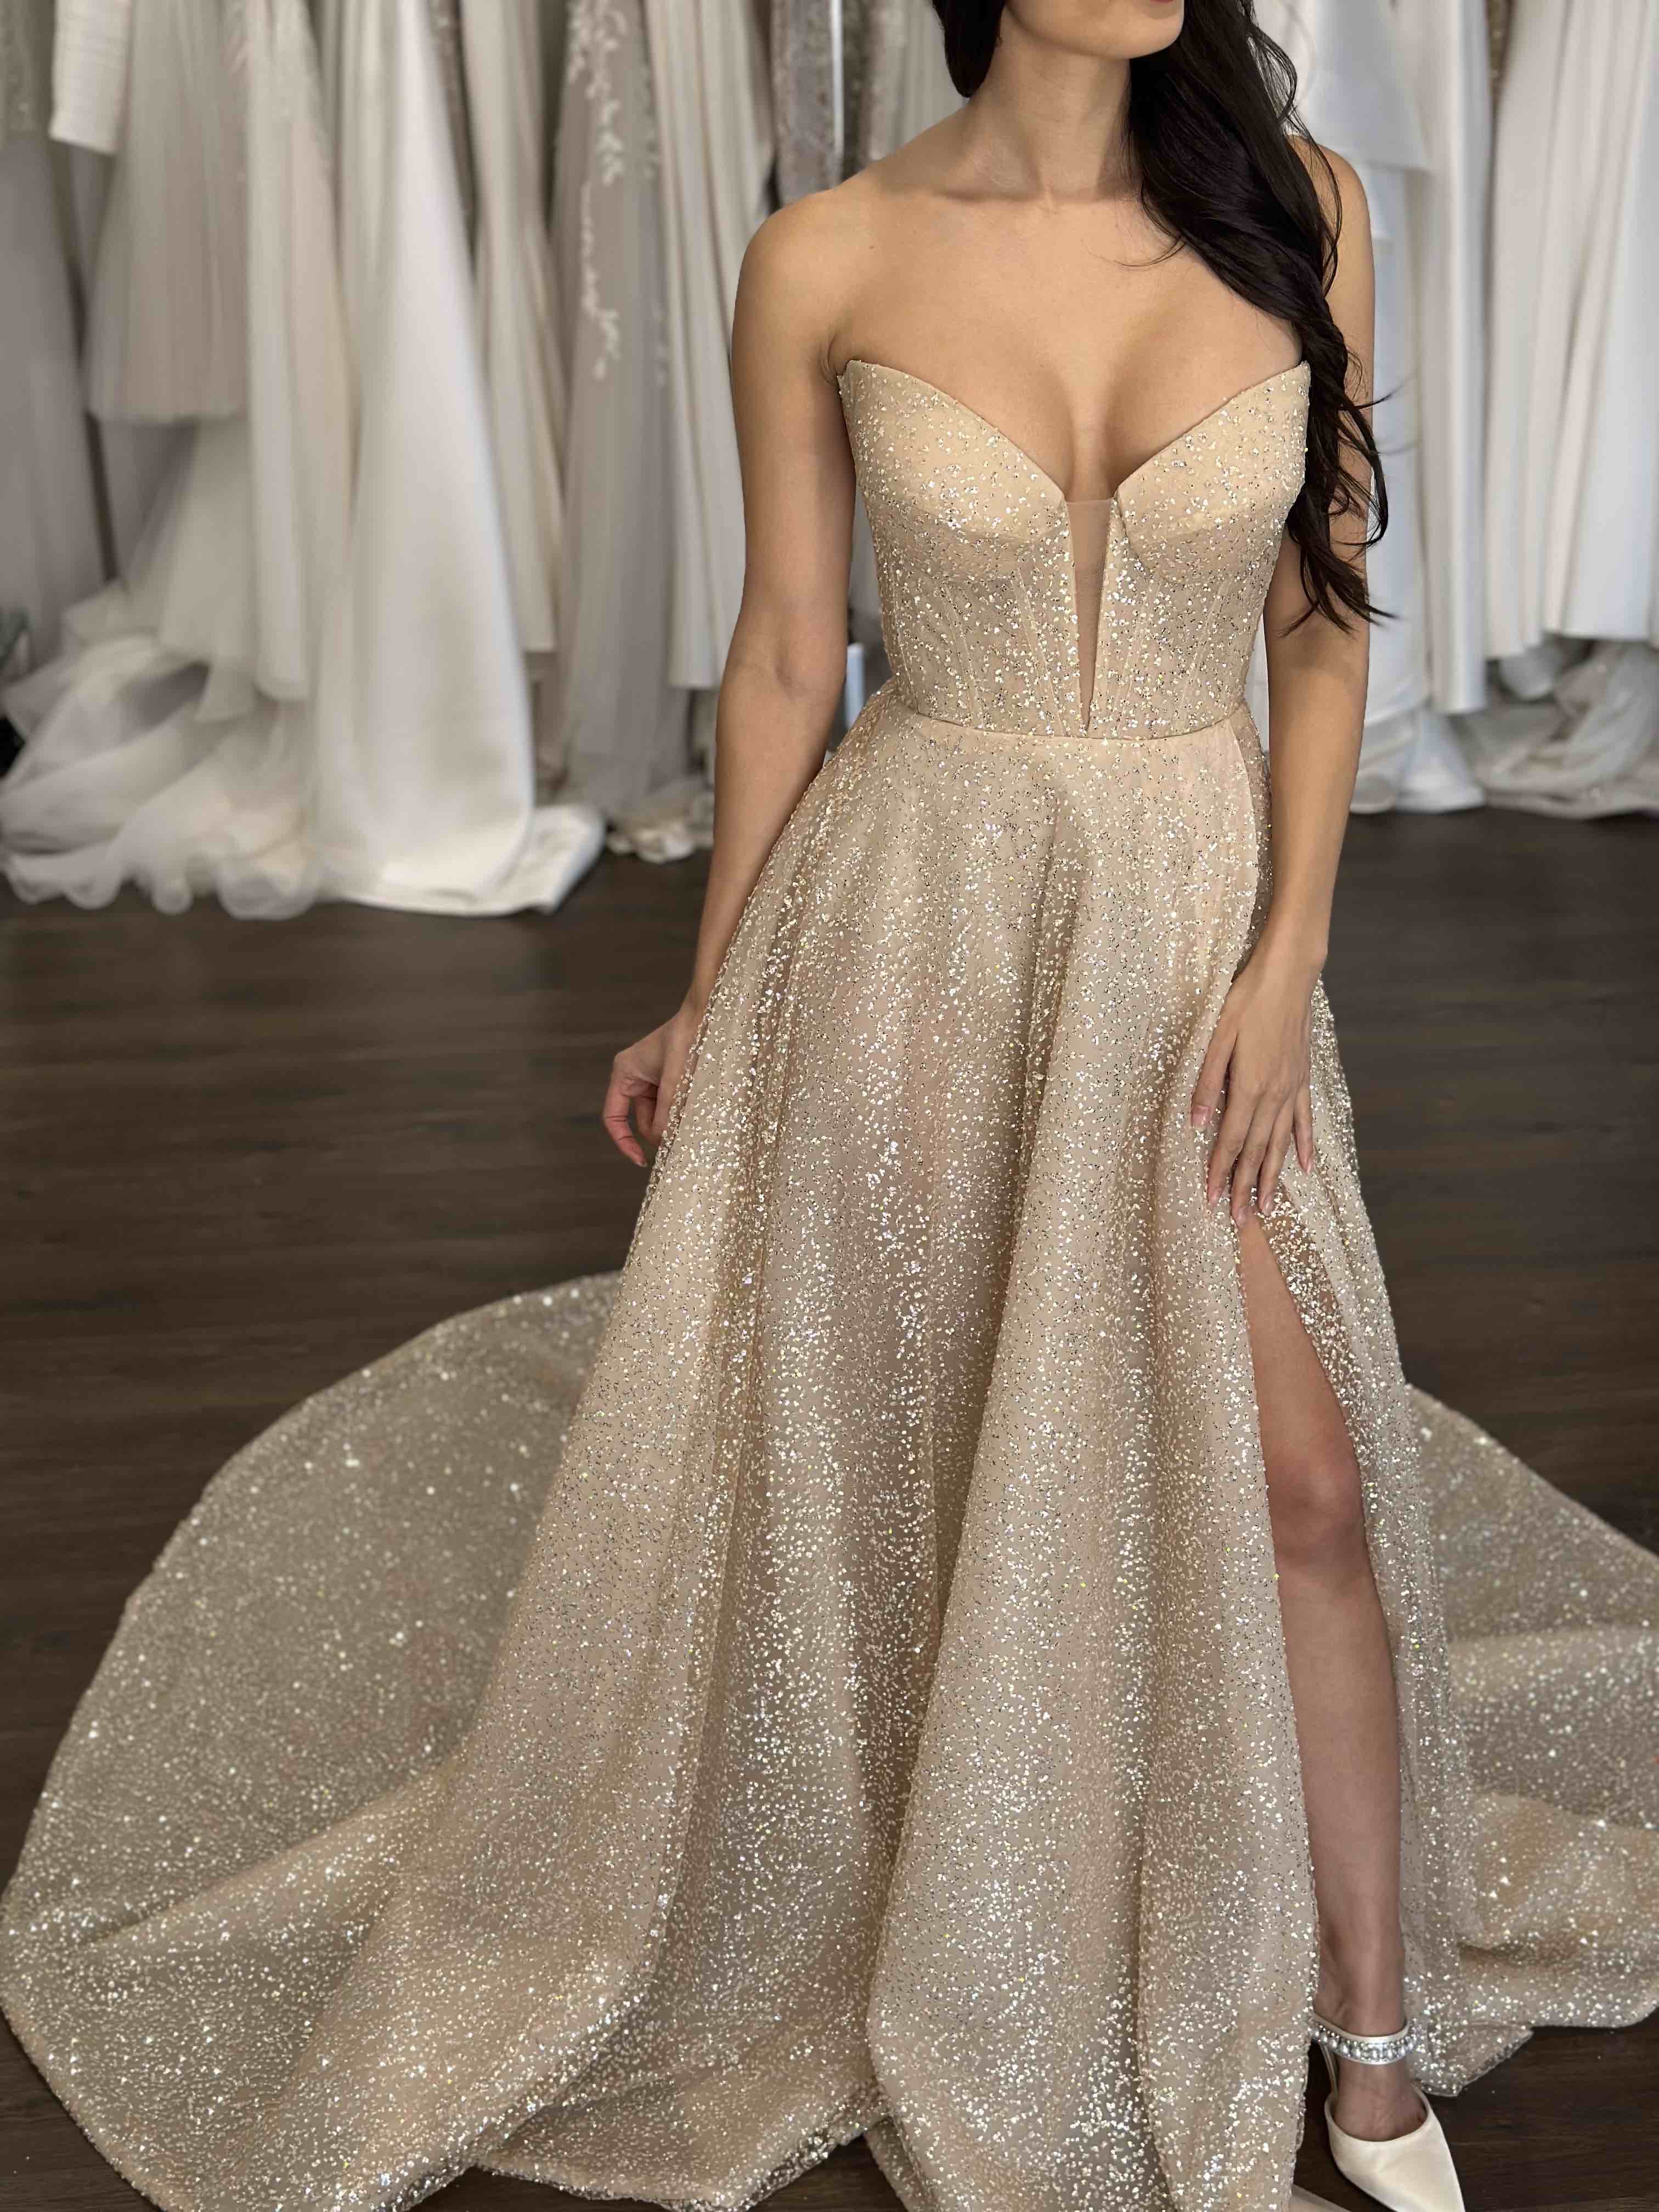 intricate corset formal dress in champagne colour